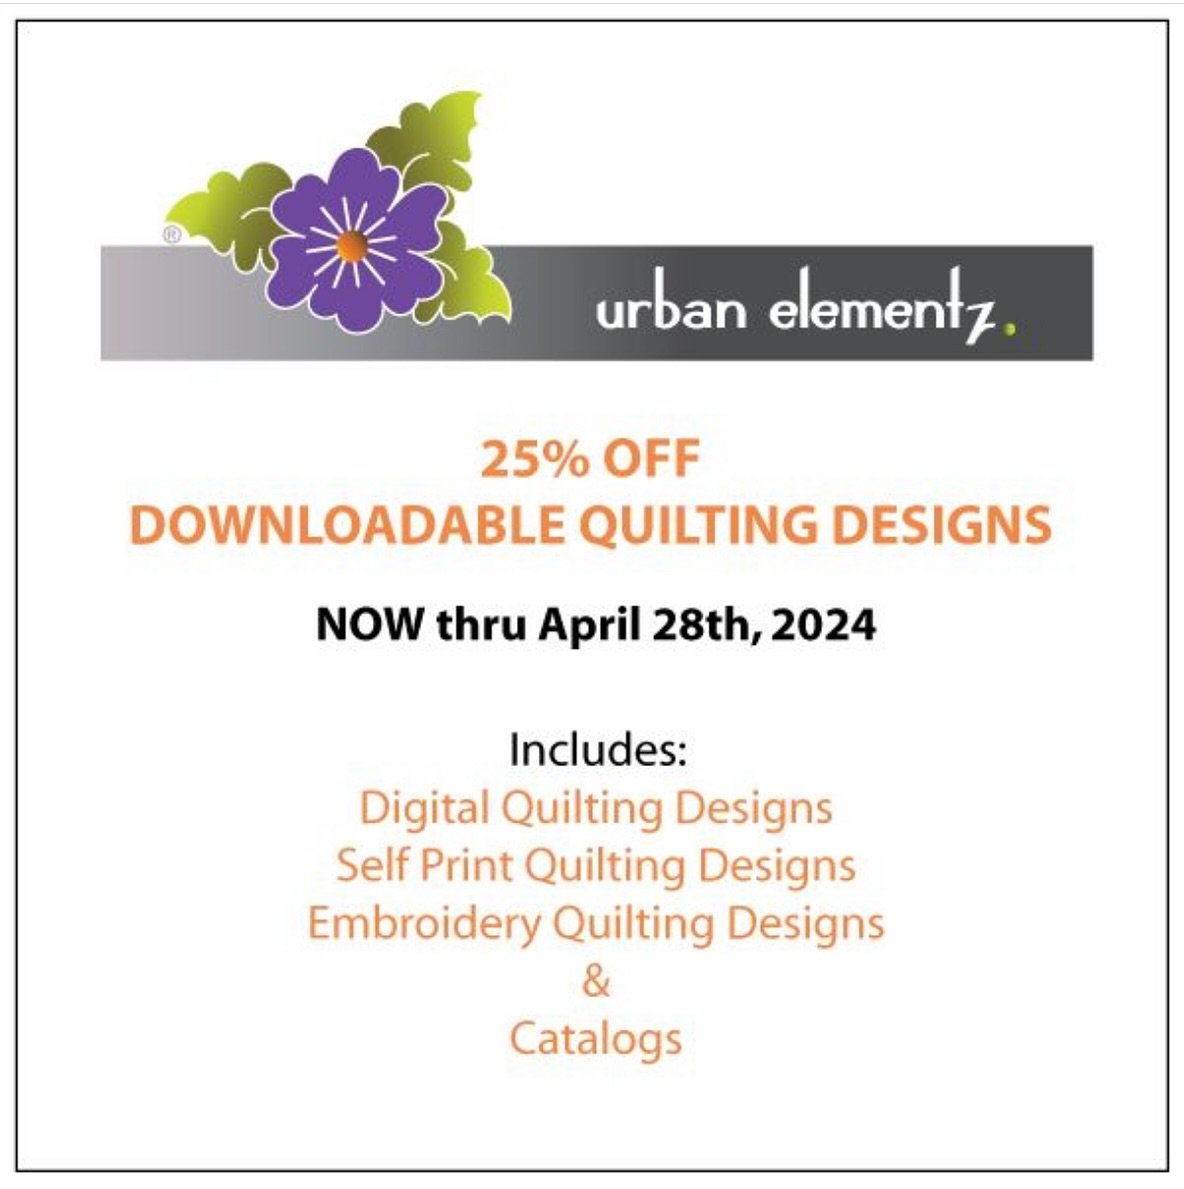 In case you missed it!!! All our digital pantos are on sale @urban.elementz &hellip;this is the best time to get those designs that have been on your wishlist.  To check out my designs go to: https://www.urbanelementz.com/quilting-designs.html?design